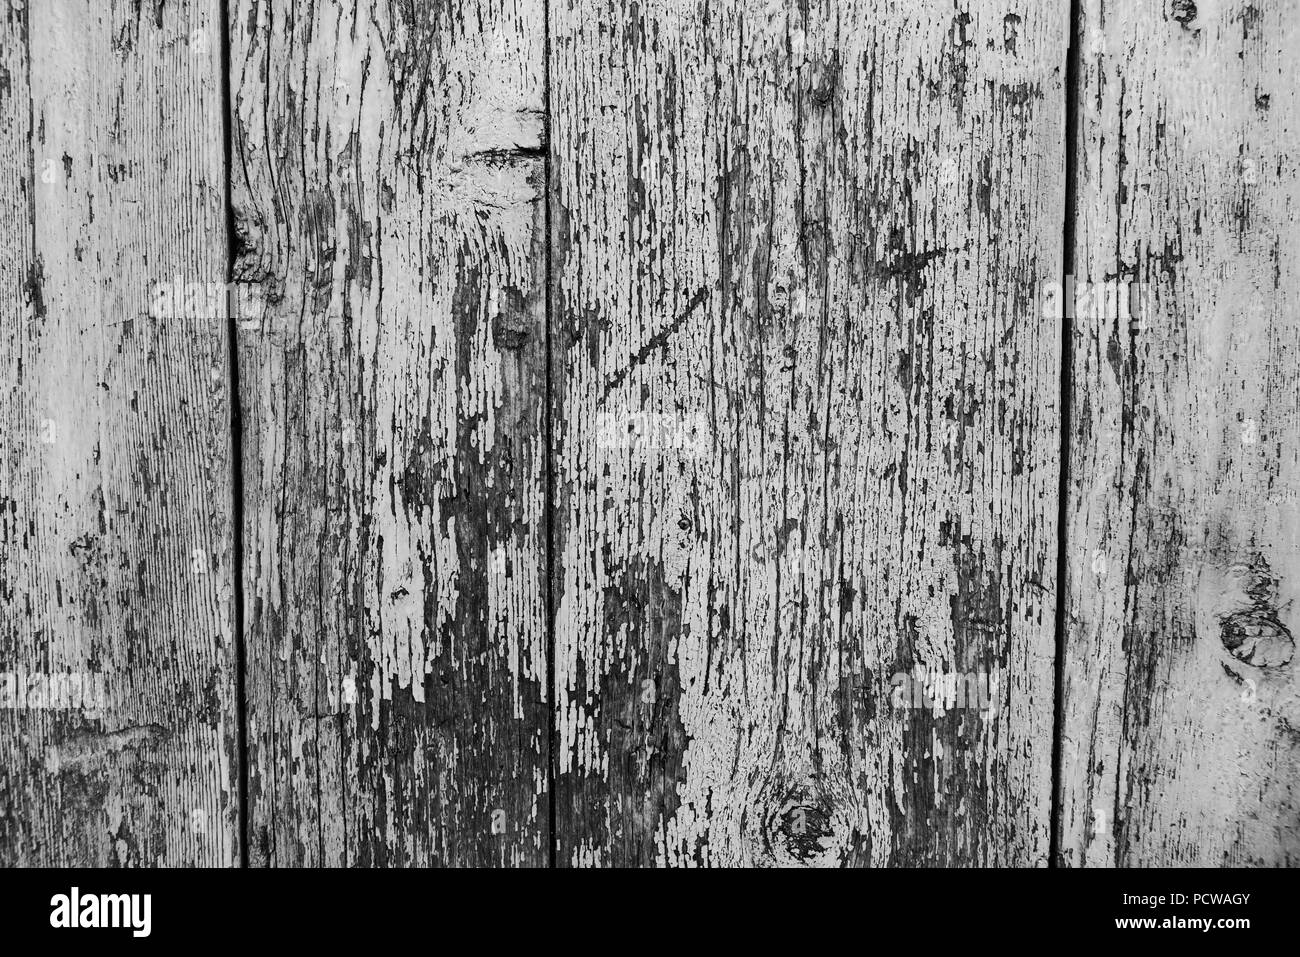 Old wooden wall as background or wallpaper. Black and white image. Stock Photo